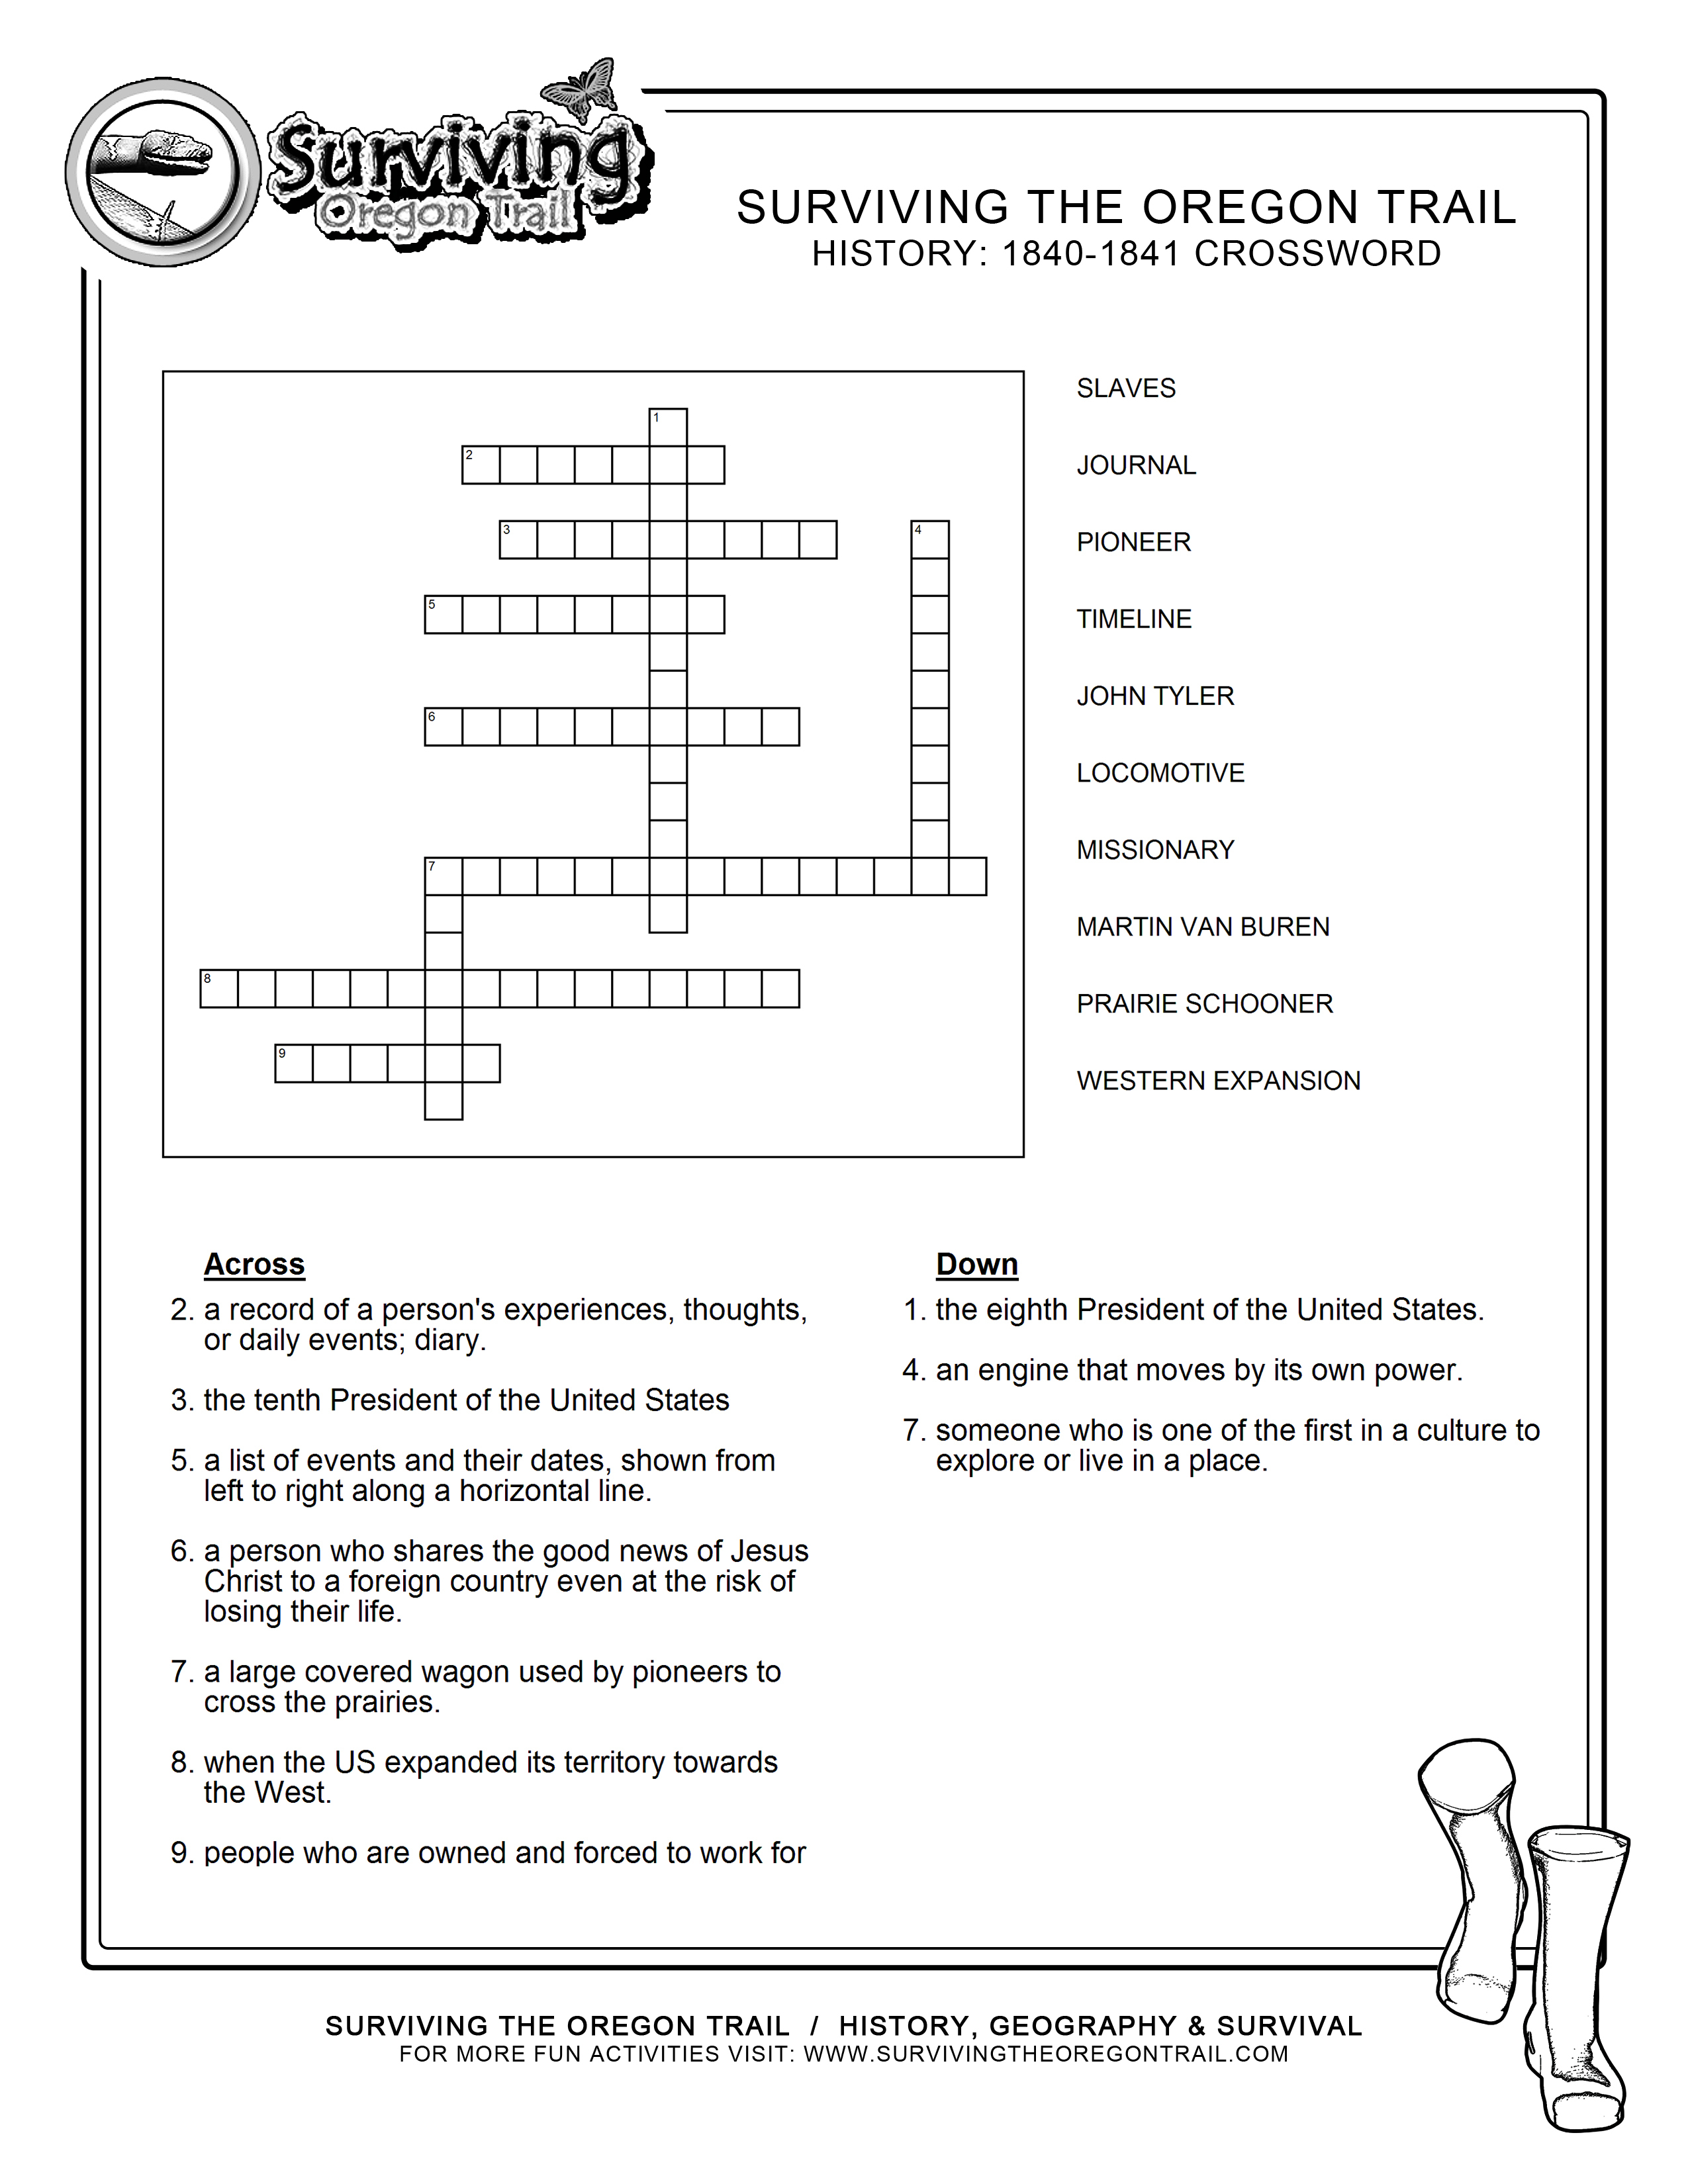 Free Crosswords Puzzle – History 1840-41 (B) – Surviving The Oregon - Printable History Crossword Puzzle